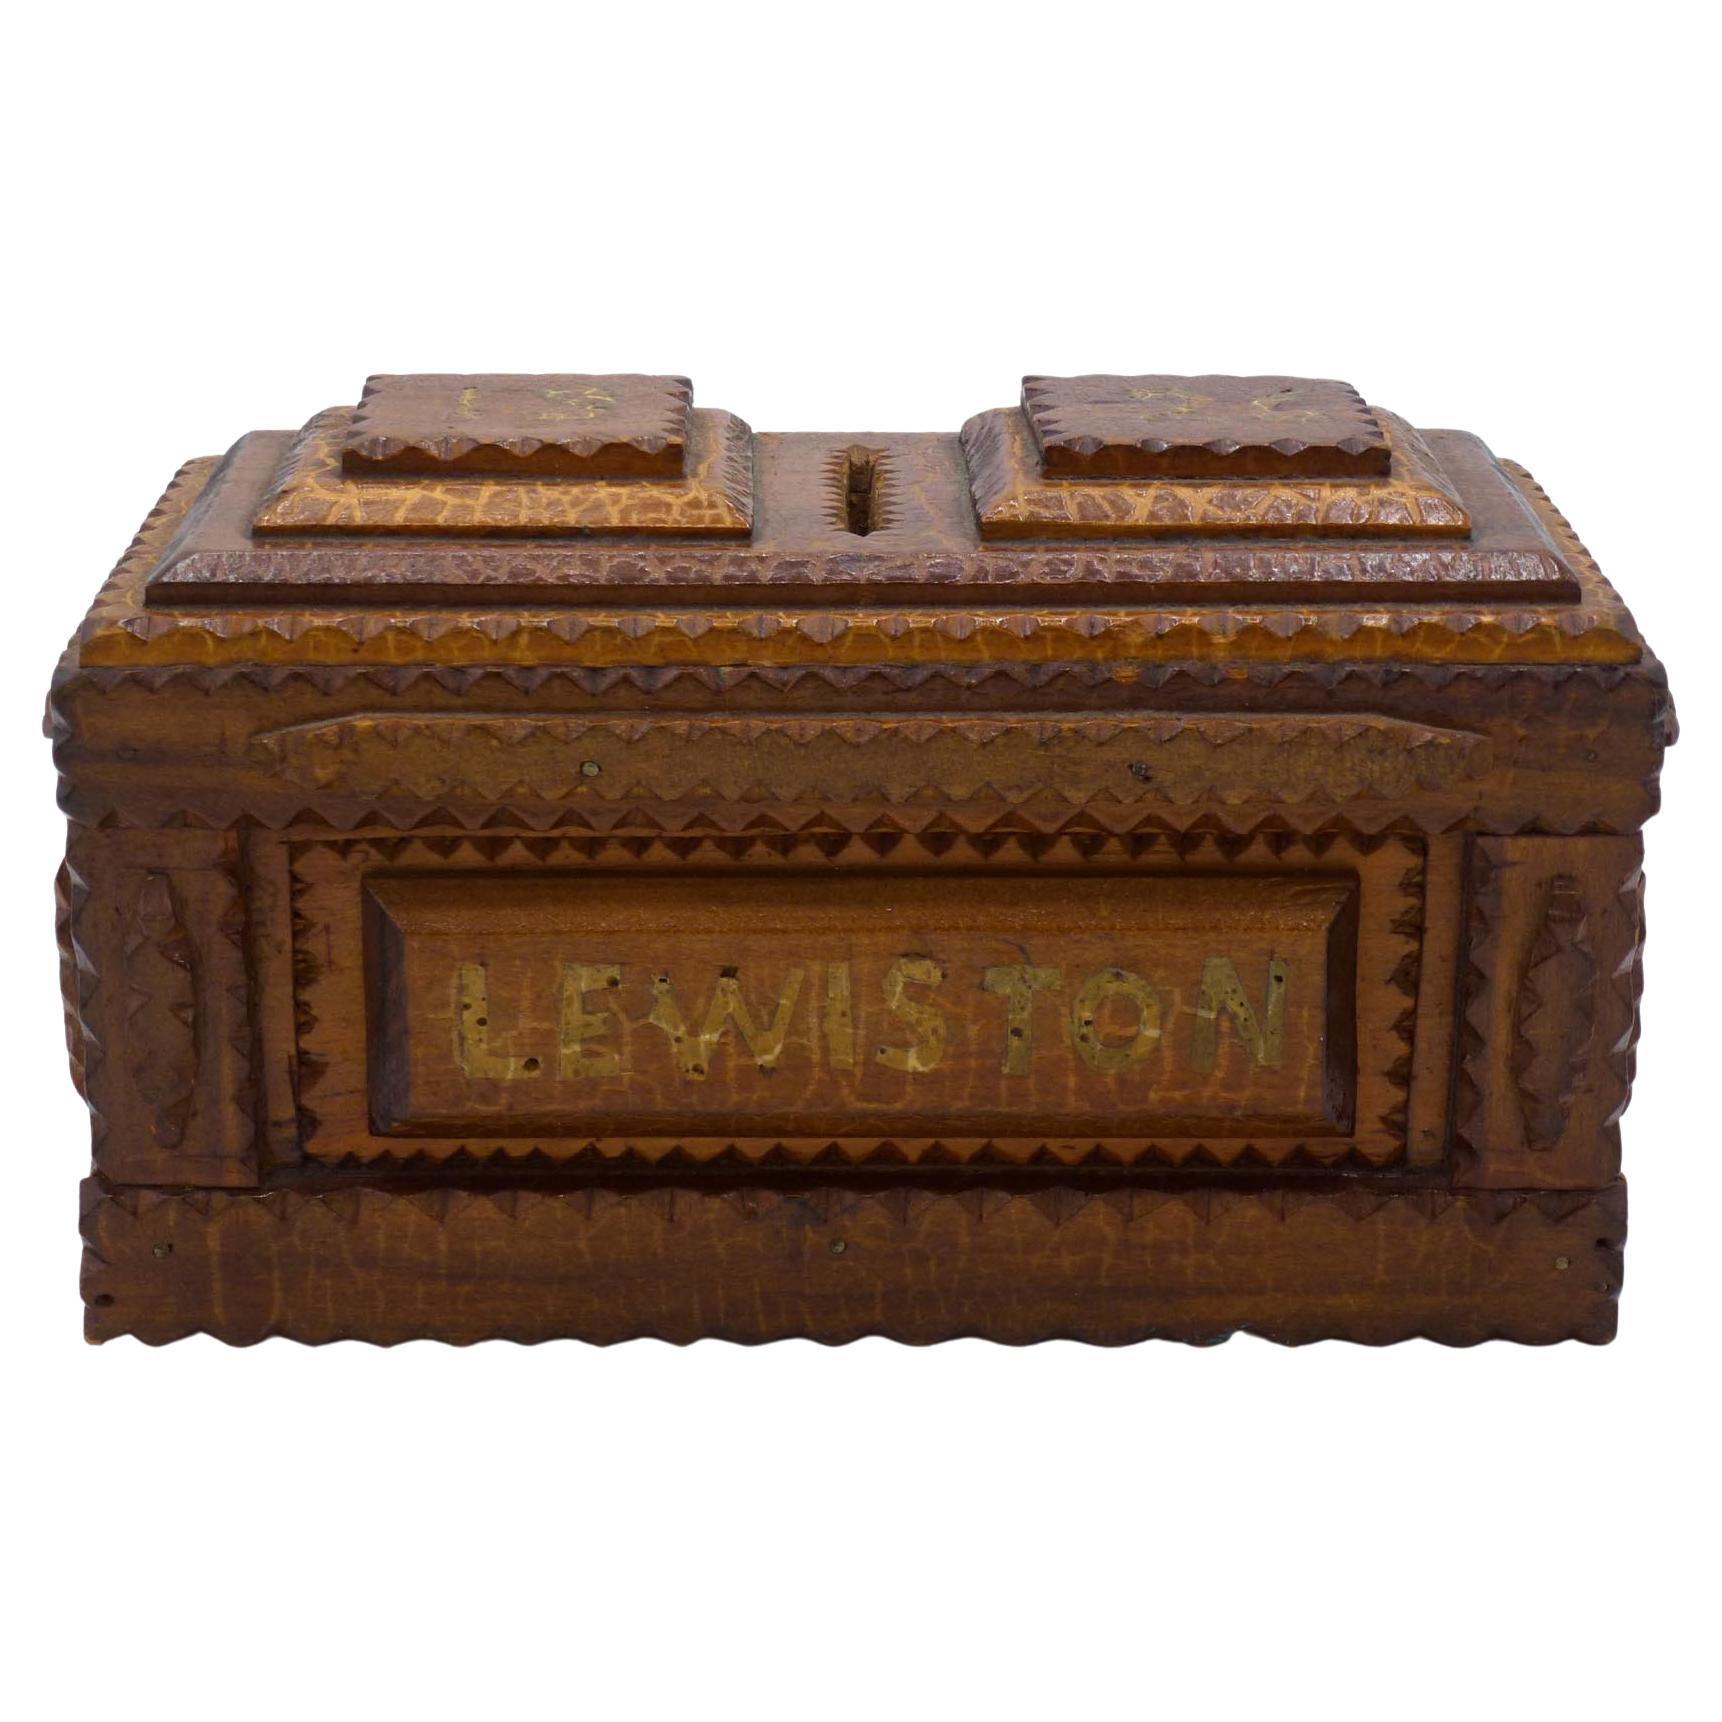 Tramp Art Bank Dated 1926 Beautiful Alligatored Surface "Lewiston" and "Maine" For Sale